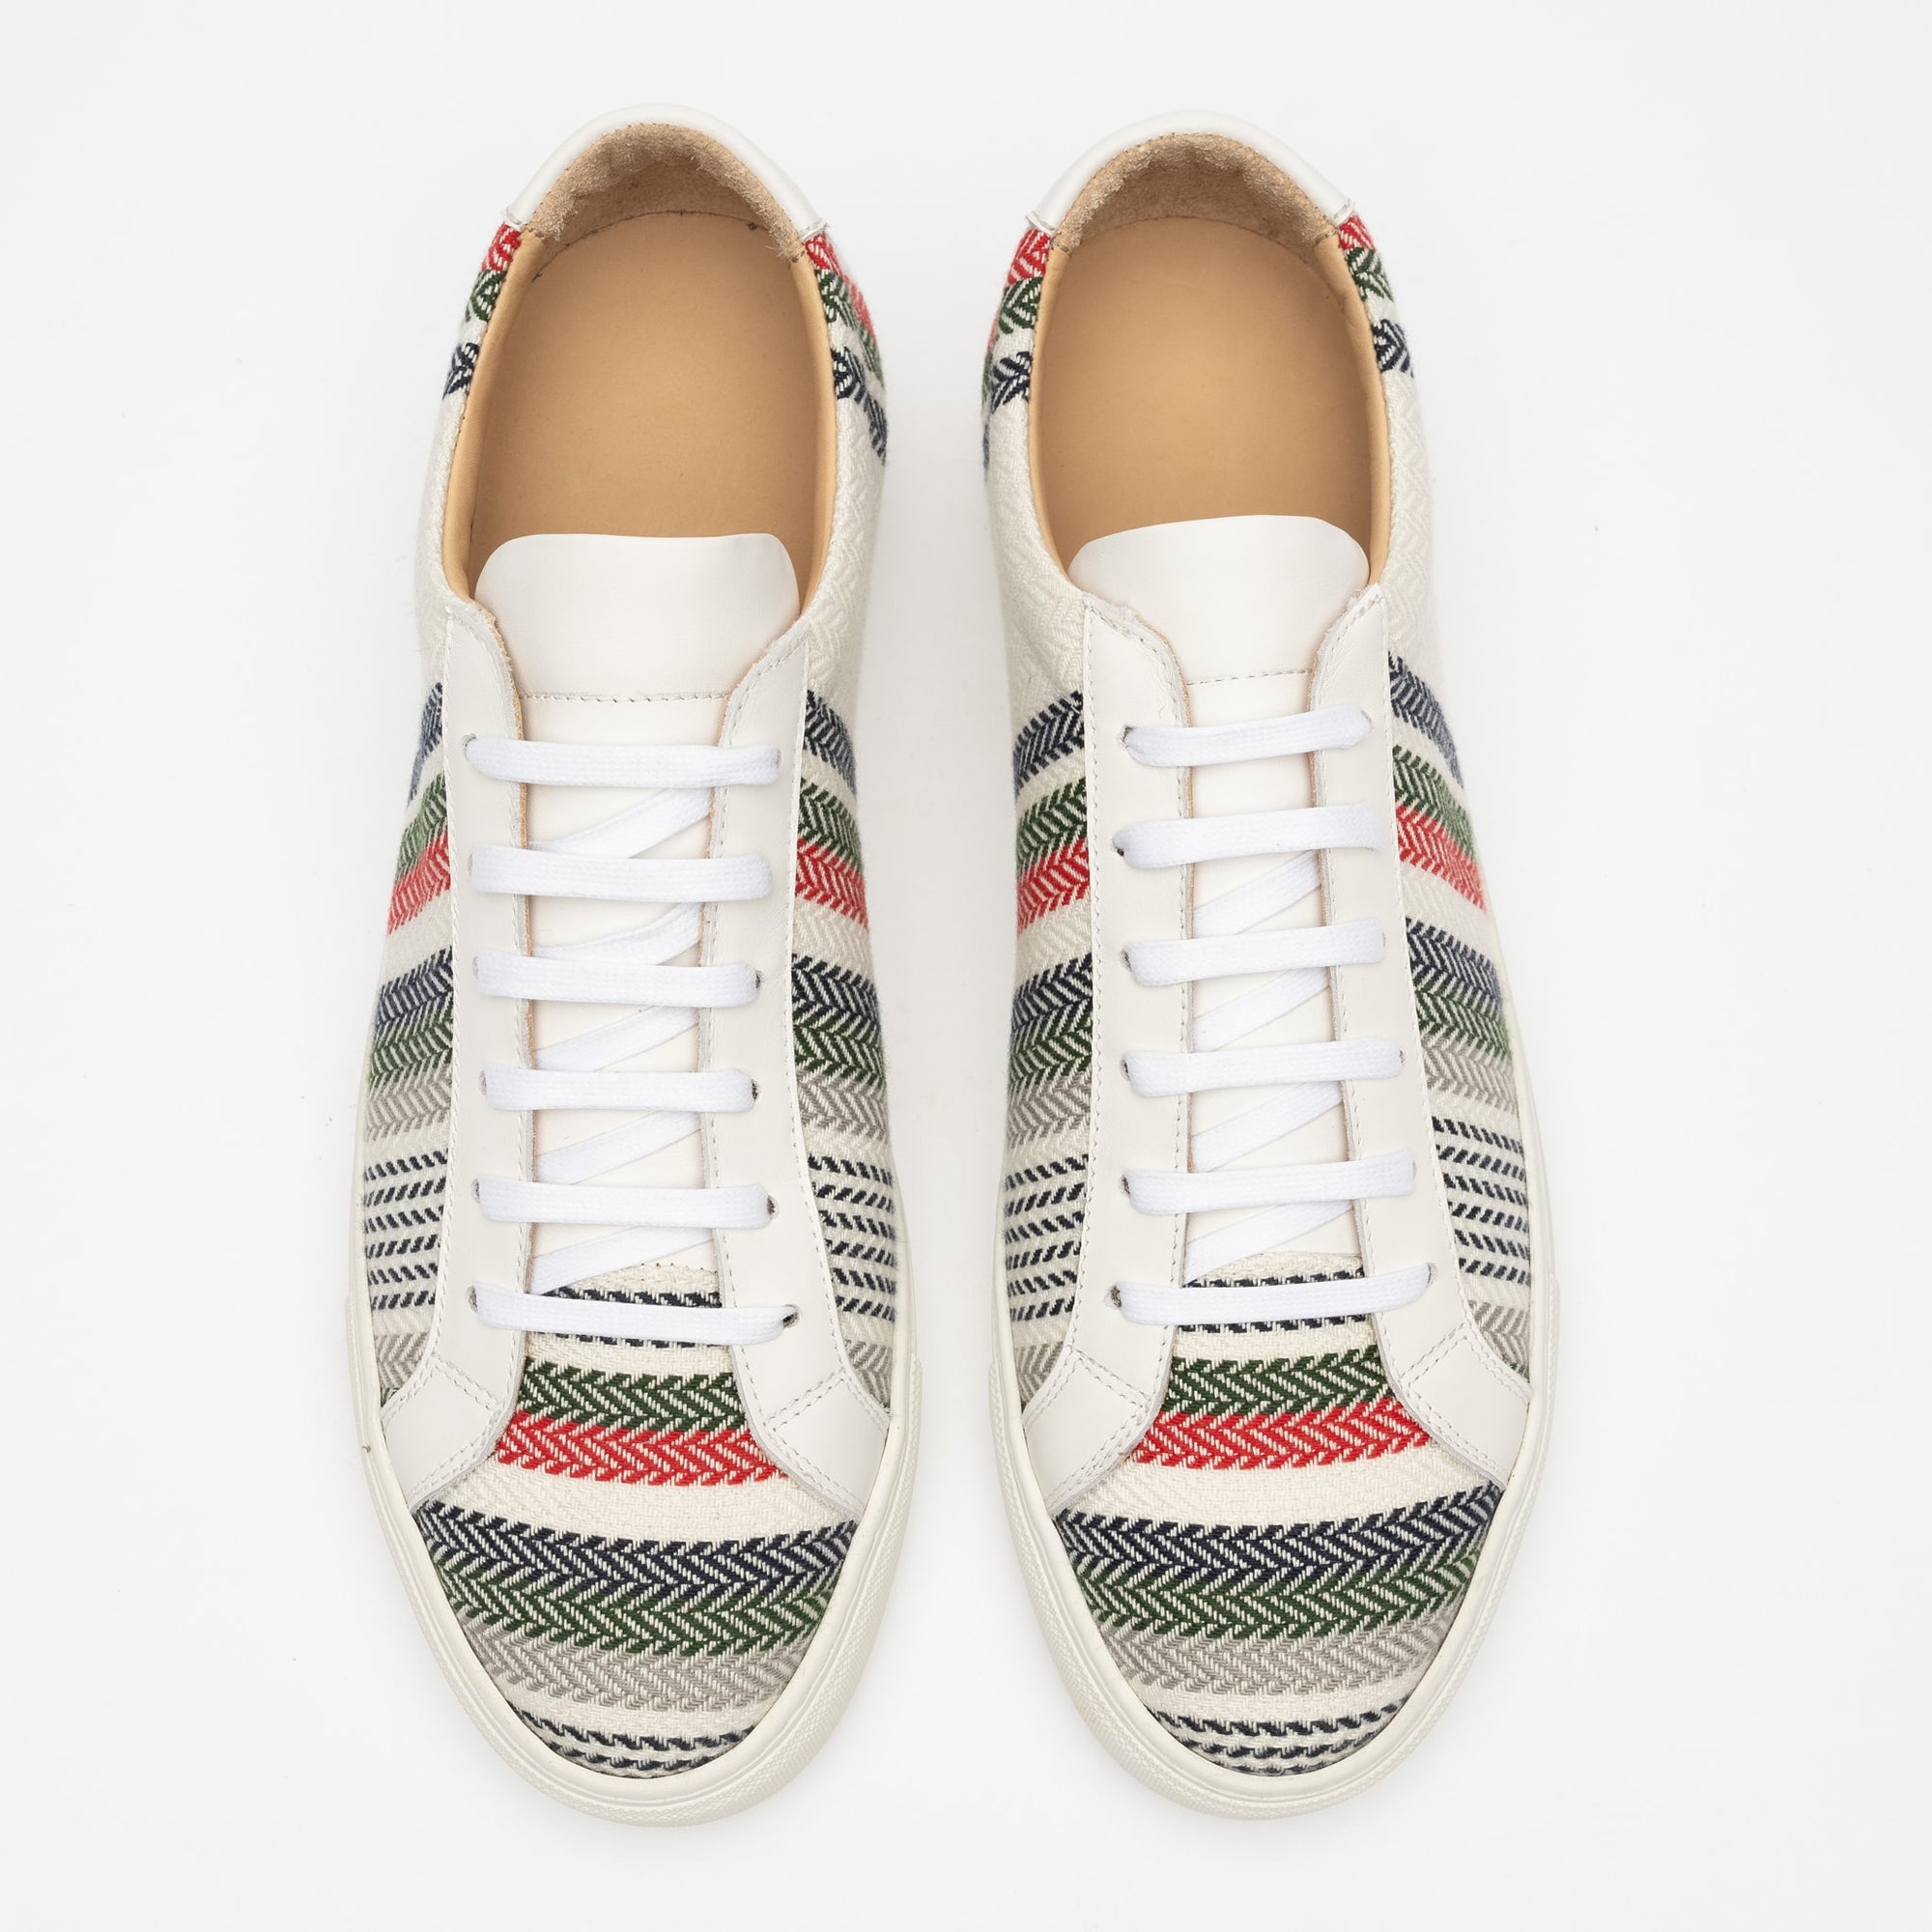 39 Best Gucci ace sneakers ideas